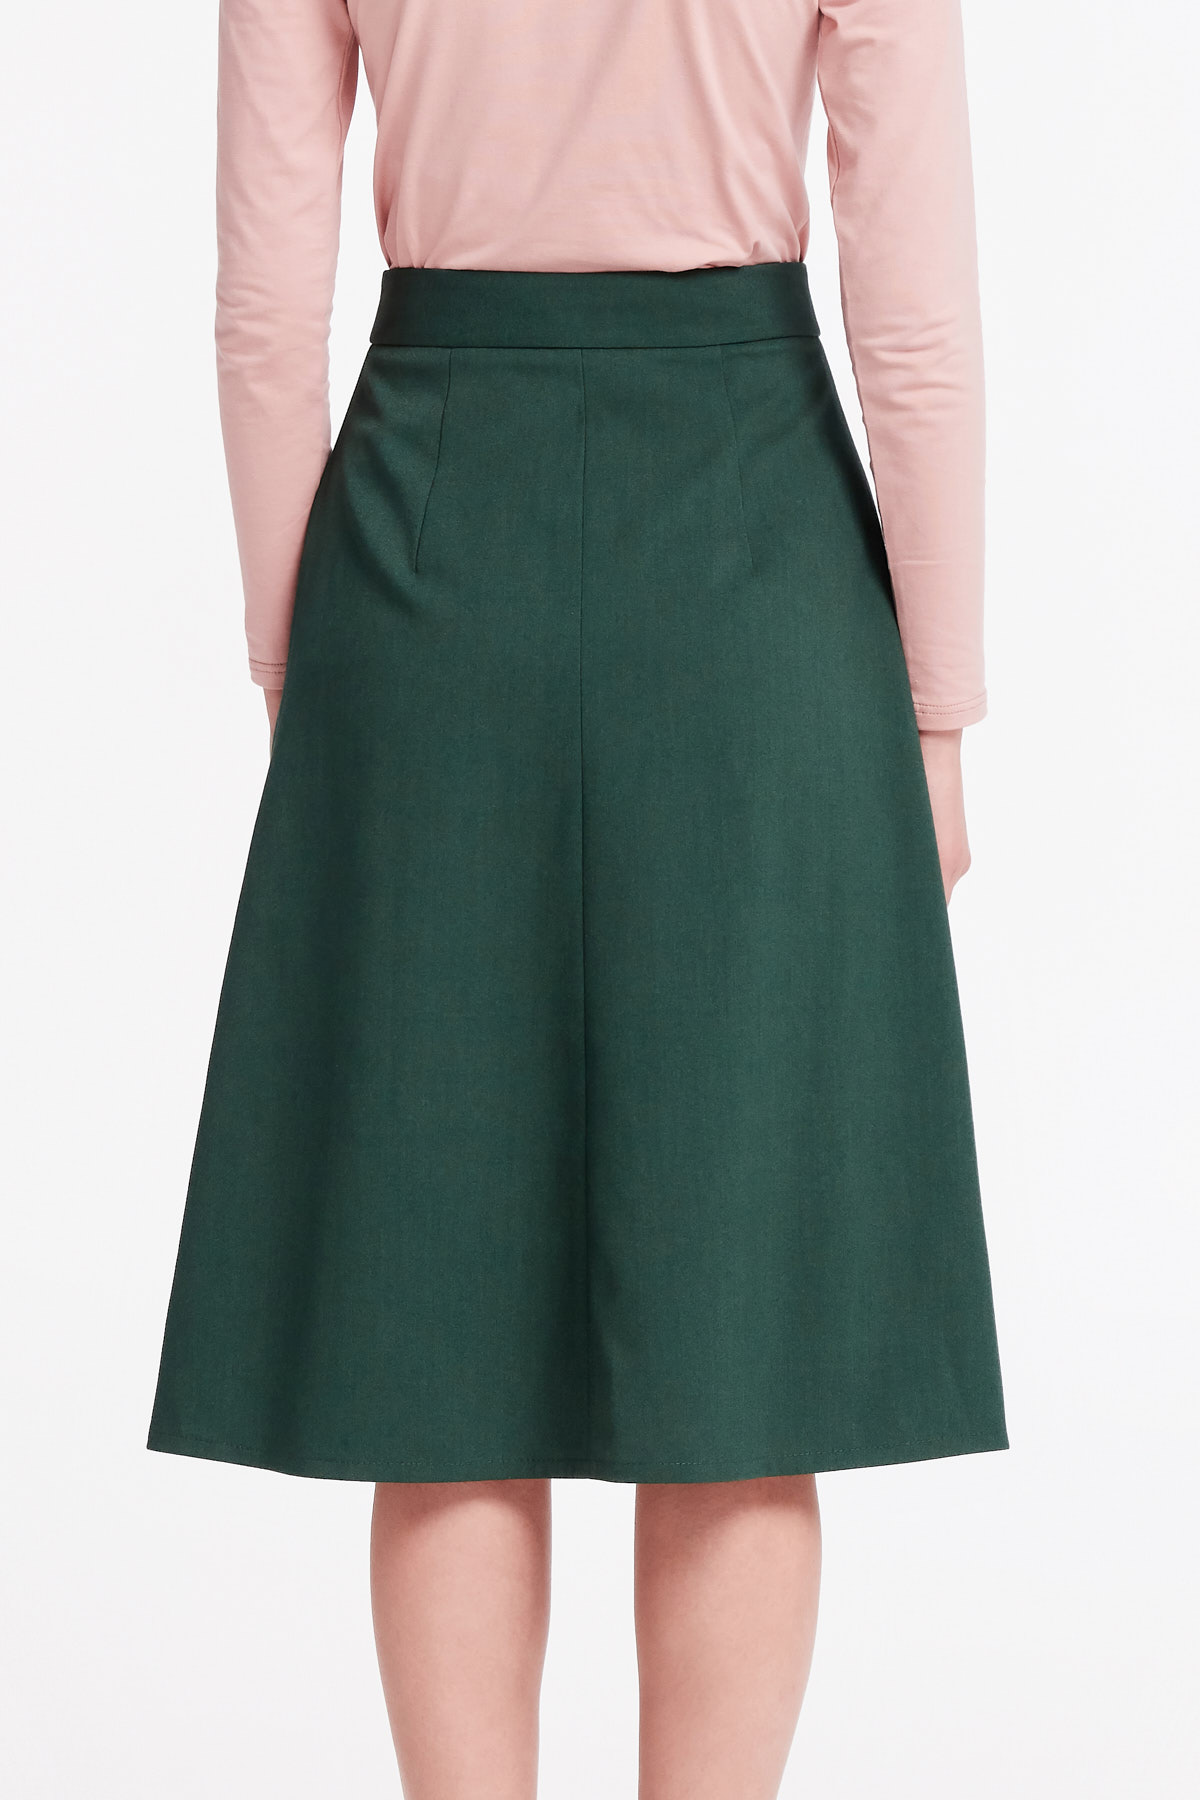 Green midi dress with a front zip, photo 6